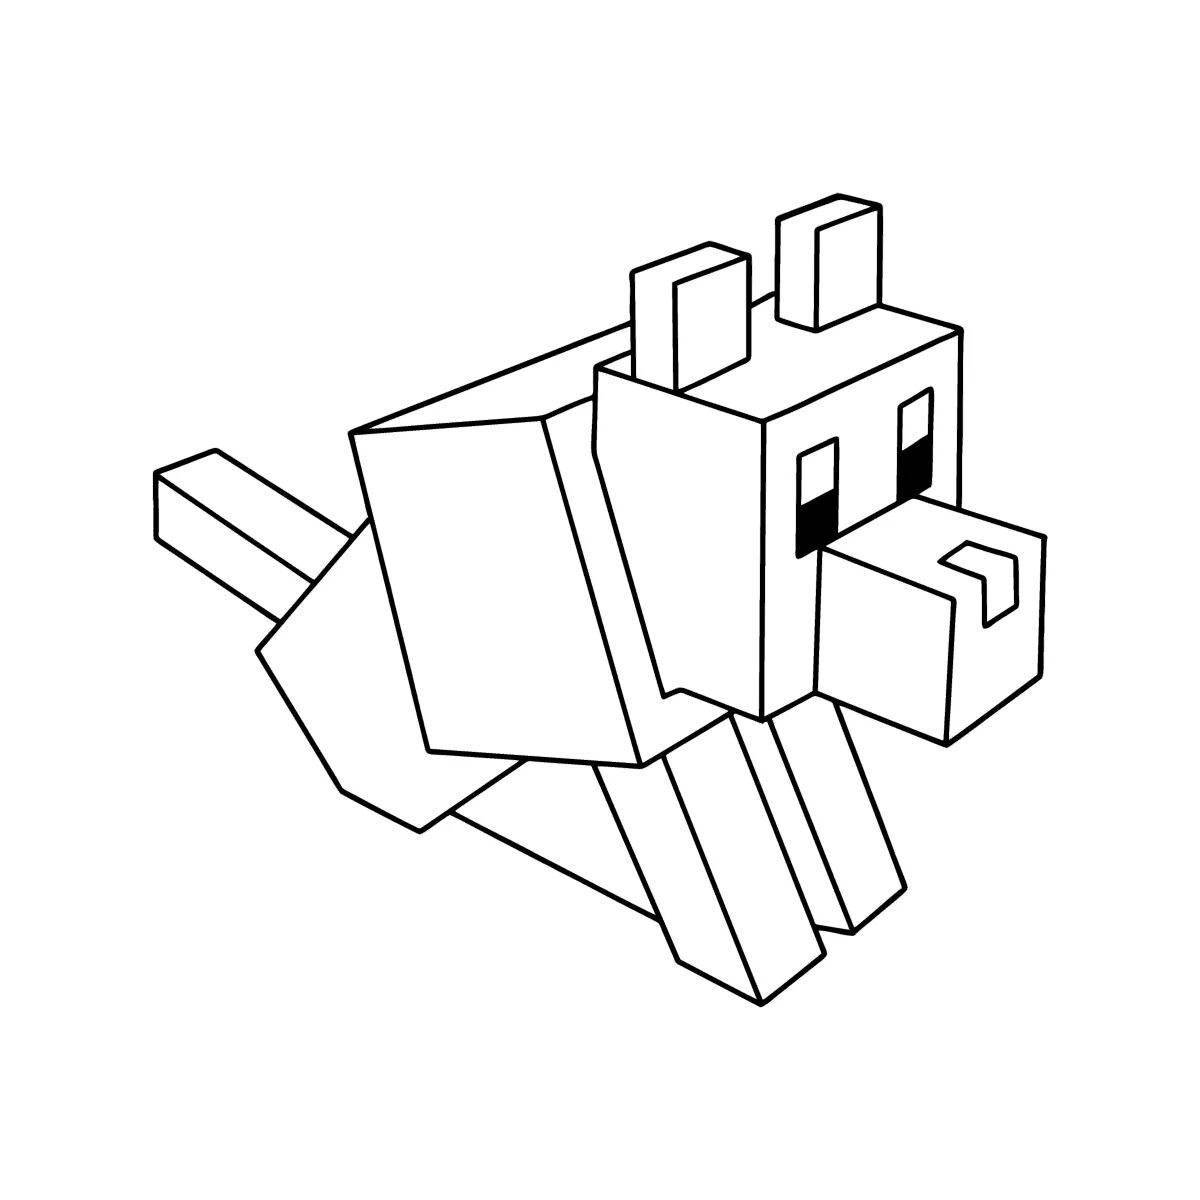 Fun apple coloring page for minecraft